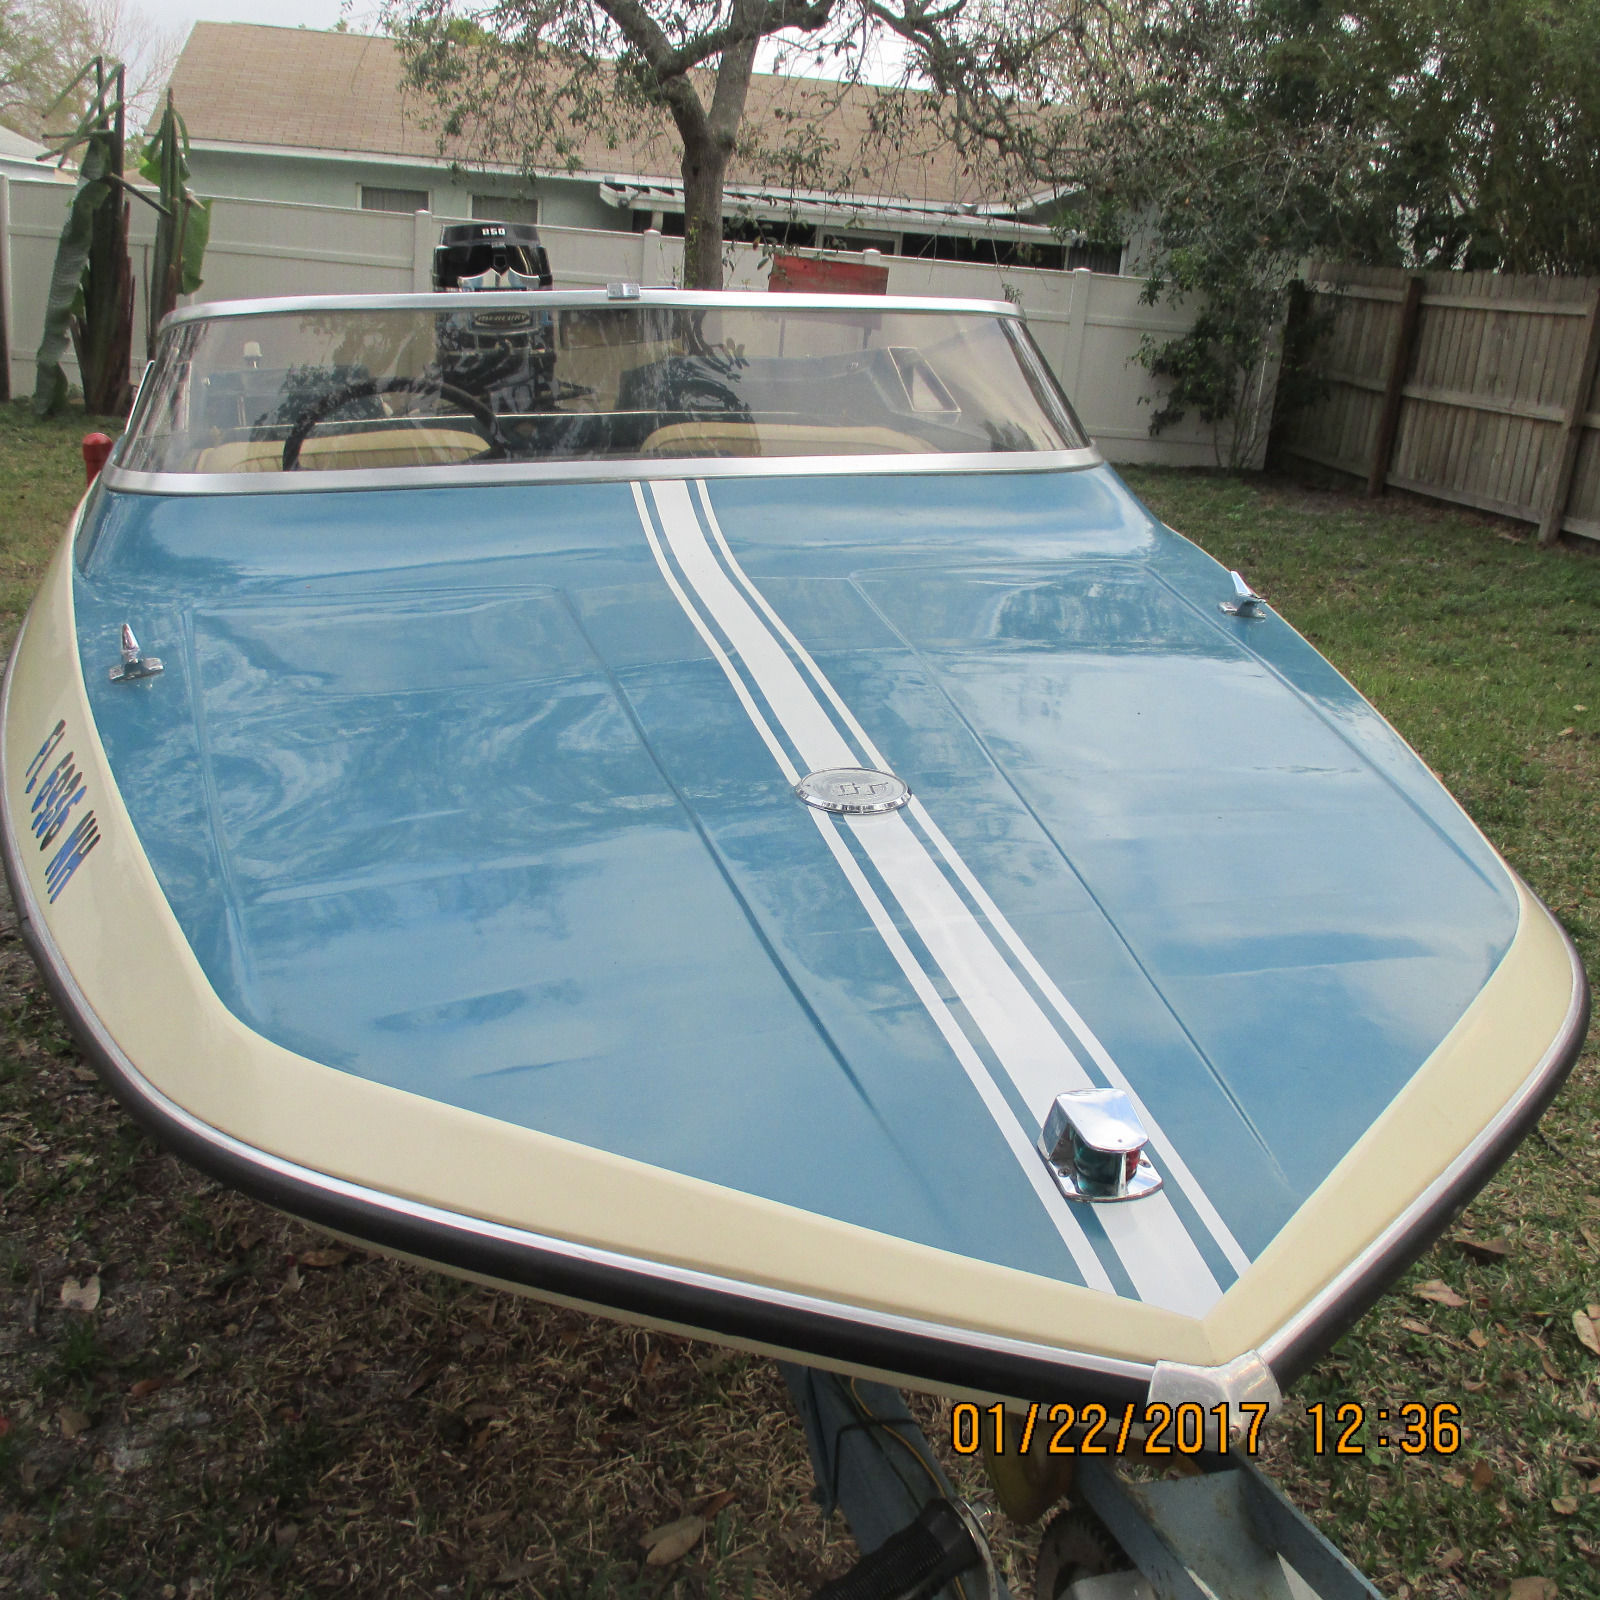 Glastron 1974 for sale for $6,500 